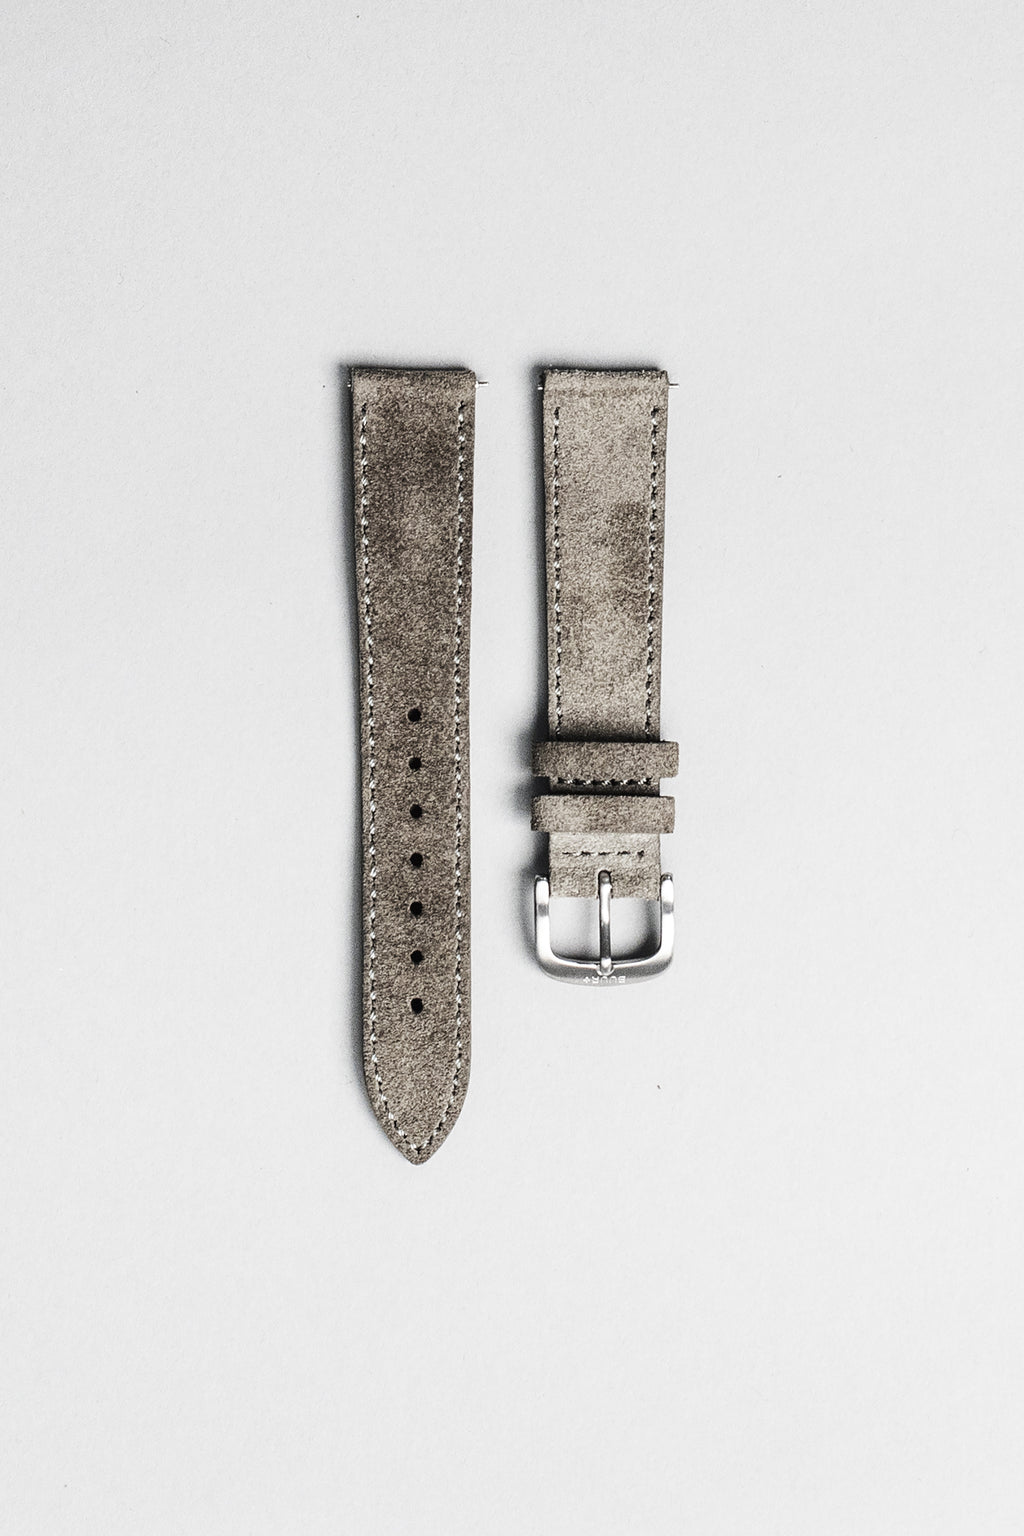 The grey Italian suede strap with brushed buckle. 18mm